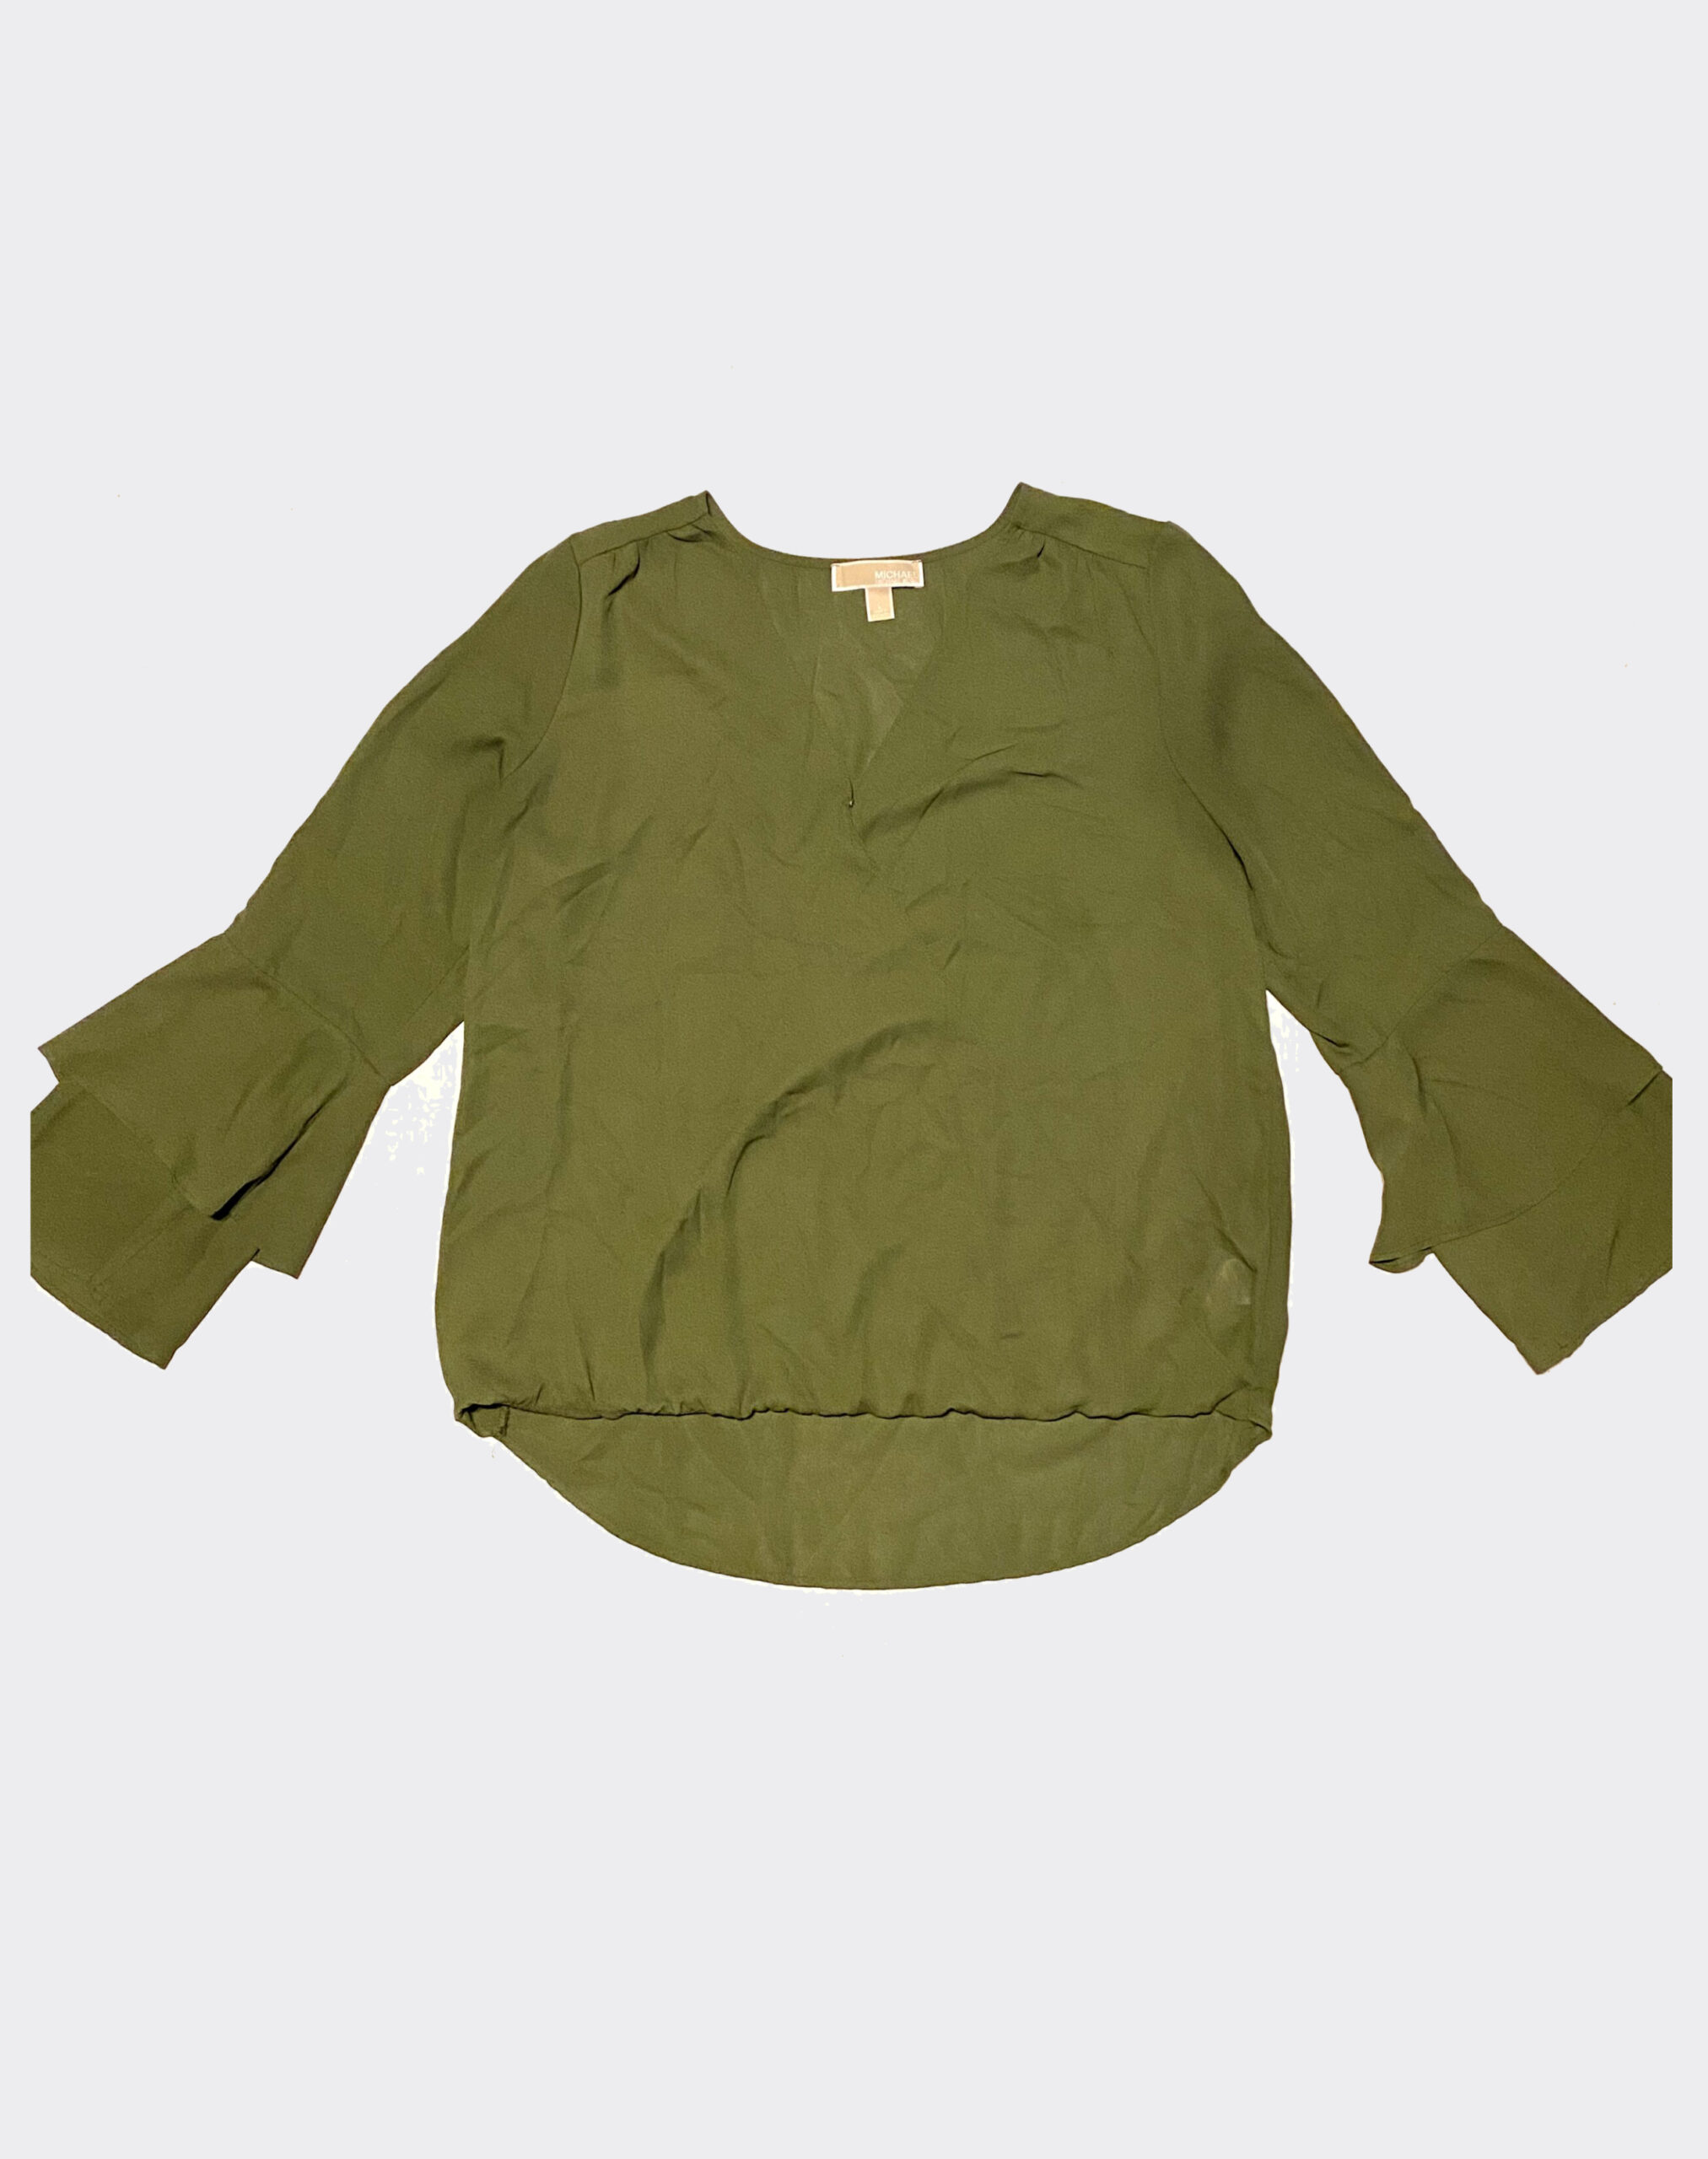 Michael Kors long sleeve blouse, olive green womens size Large – High ...